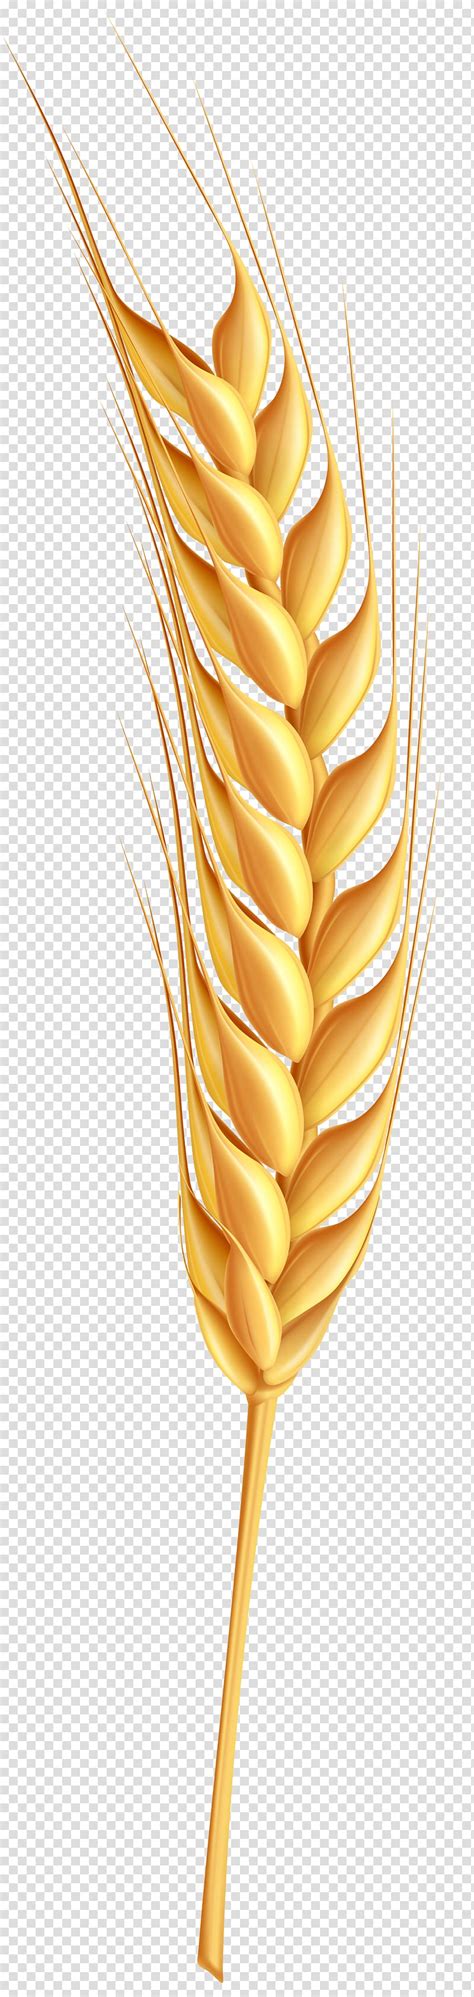 Wheat Wheat Transparent Background PNG Clipart HiClipart